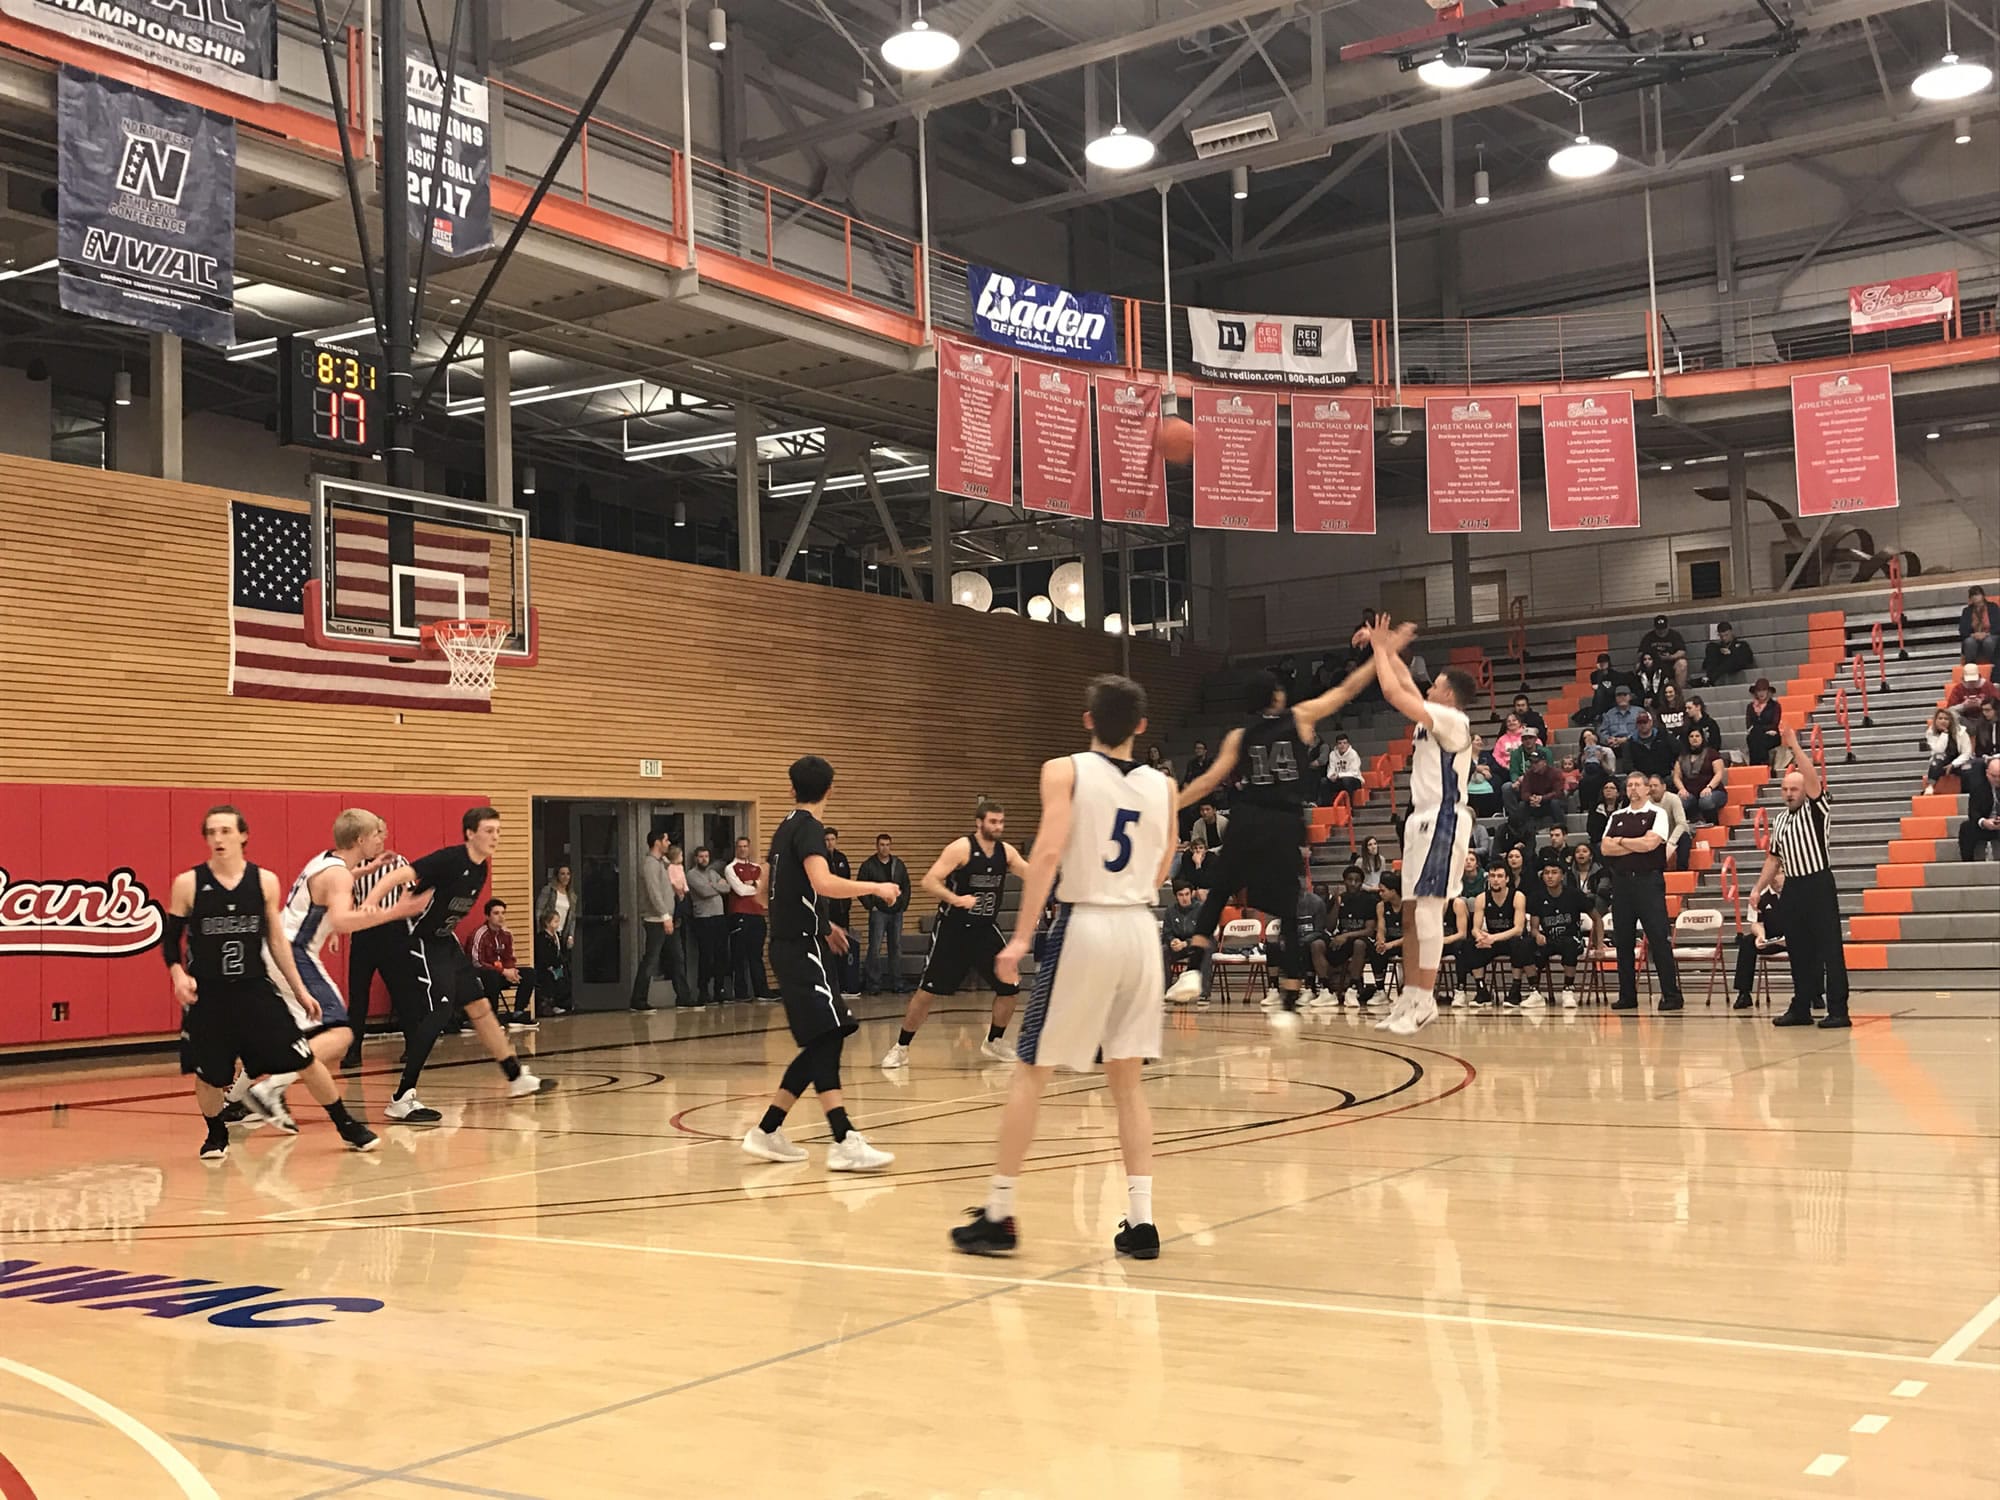 Clark's Ty Cleland fires up a 3-pointer -- which he made -- during the first half of Clark's Sweet 16 game against Whatcom in the NWAC Men's Basketball Championships Thursday at Everett Community College. Cleland had a season-best 24 points, but Clark fell to Whatcom in overtime, 84-78.